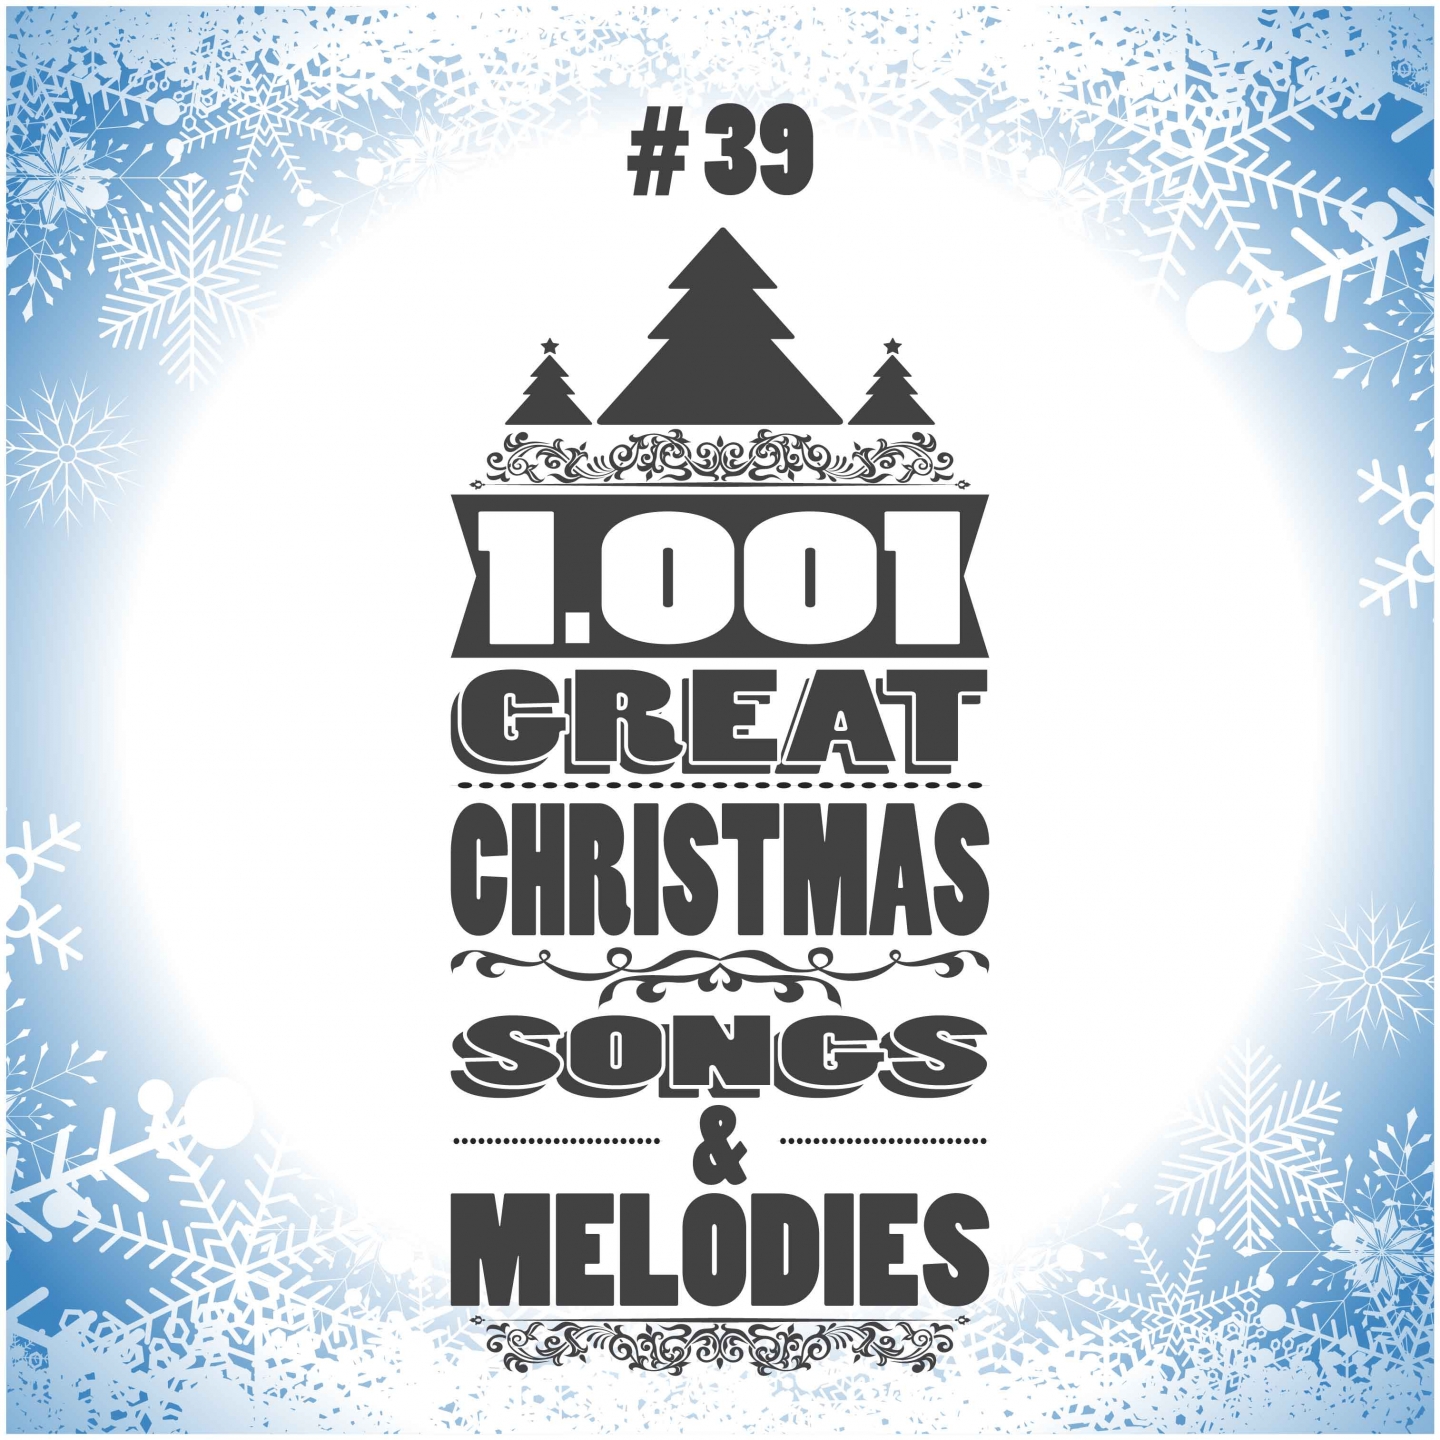 1001 Great Christmas Songs & Melodies, Vol. 39